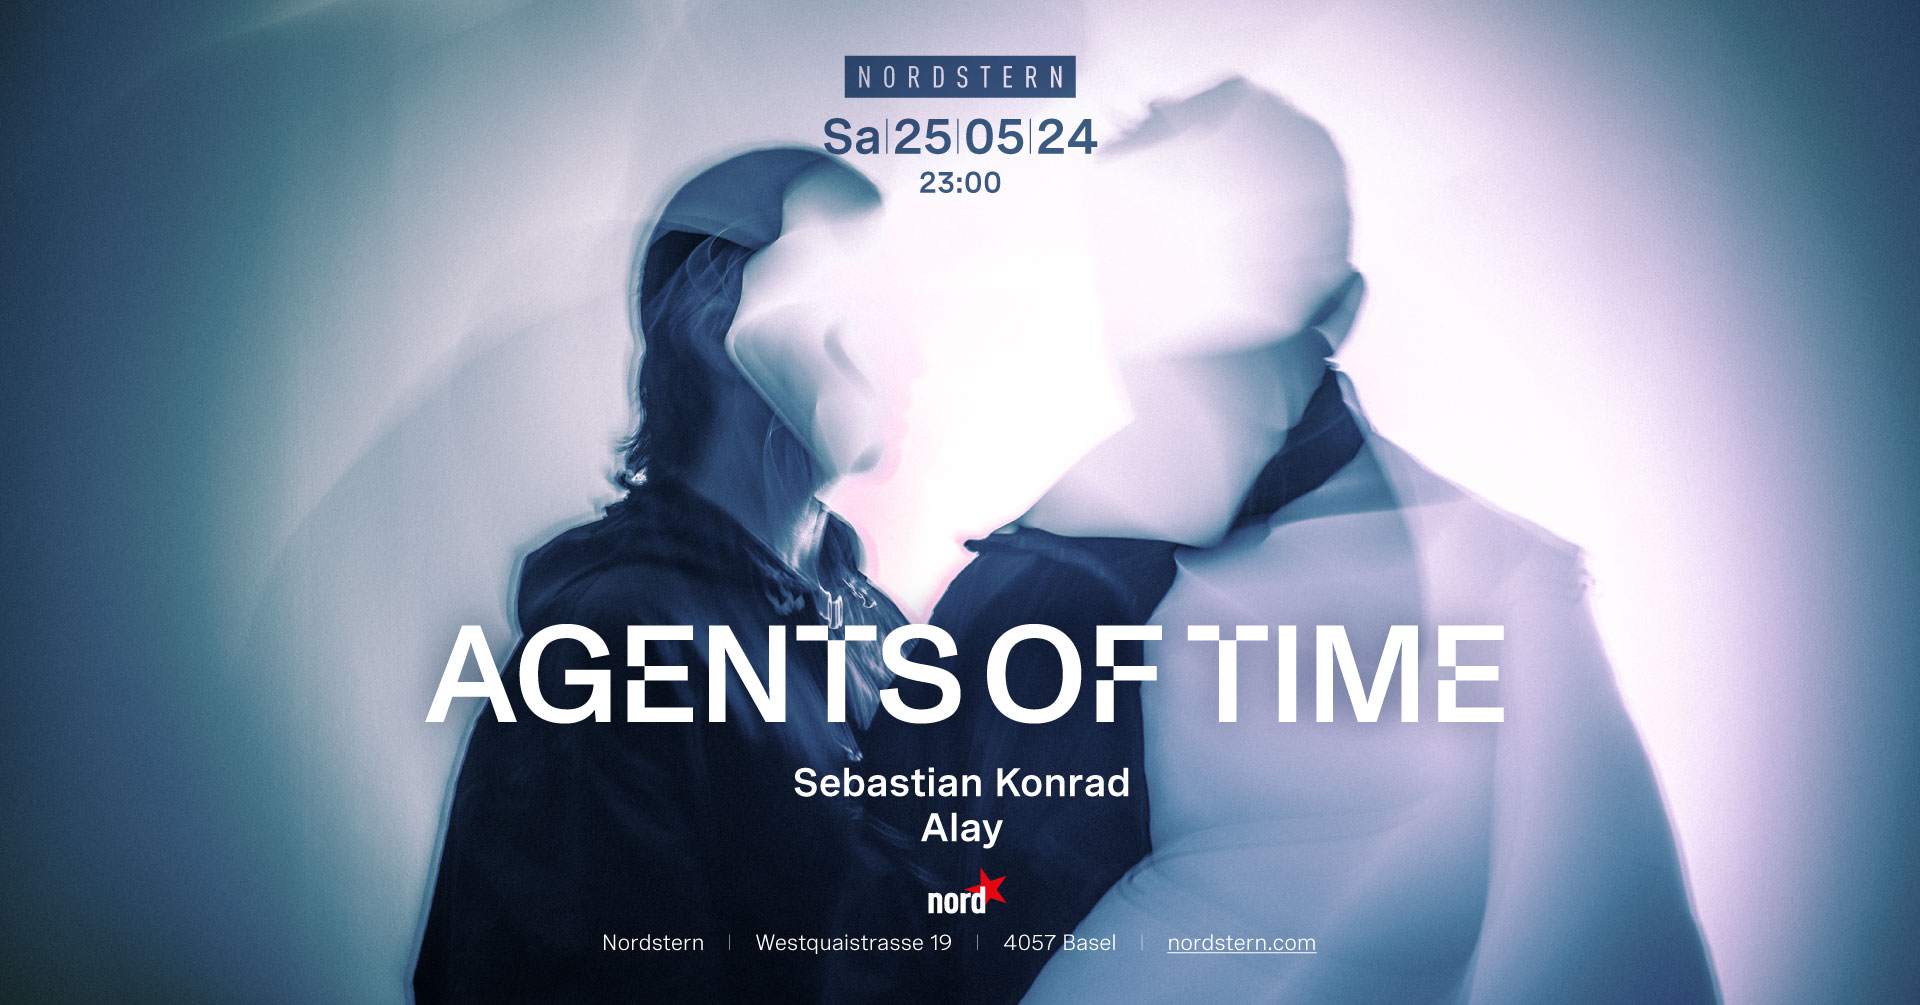 Agents Of Time - フライヤー表